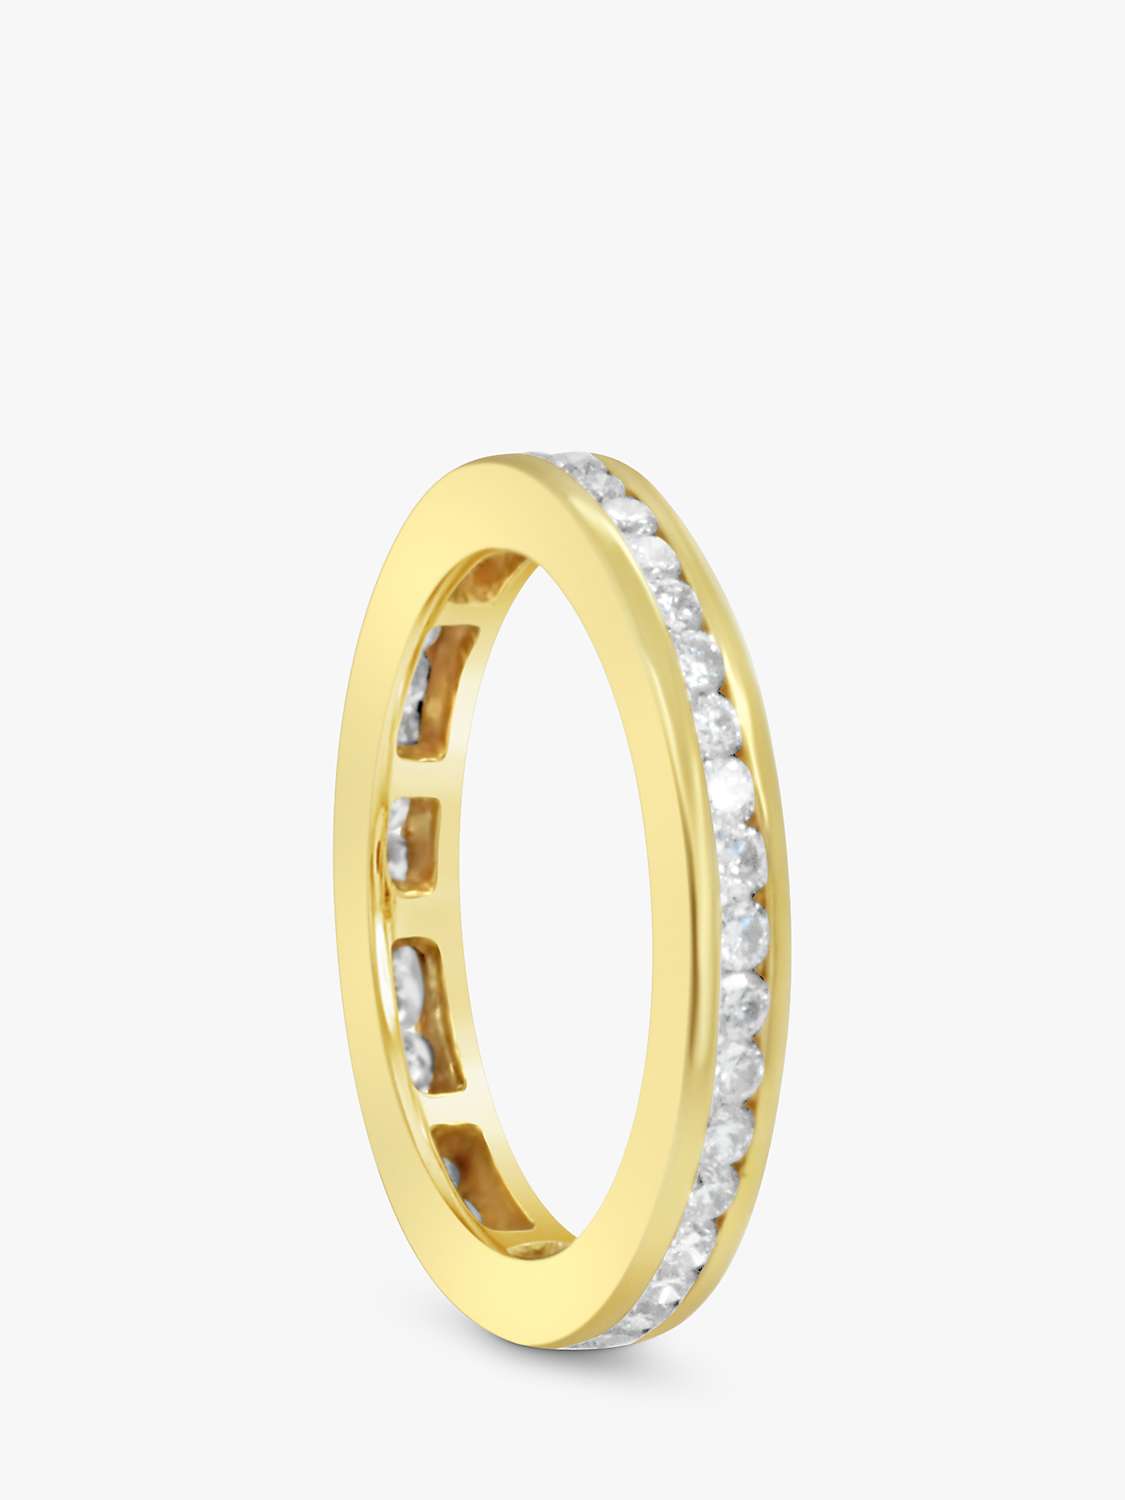 Buy Milton & Humble Jewellery Second Hand Boodle & Dunthorne 18ct Yellow Gold & Diamond Eternity Ring Online at johnlewis.com